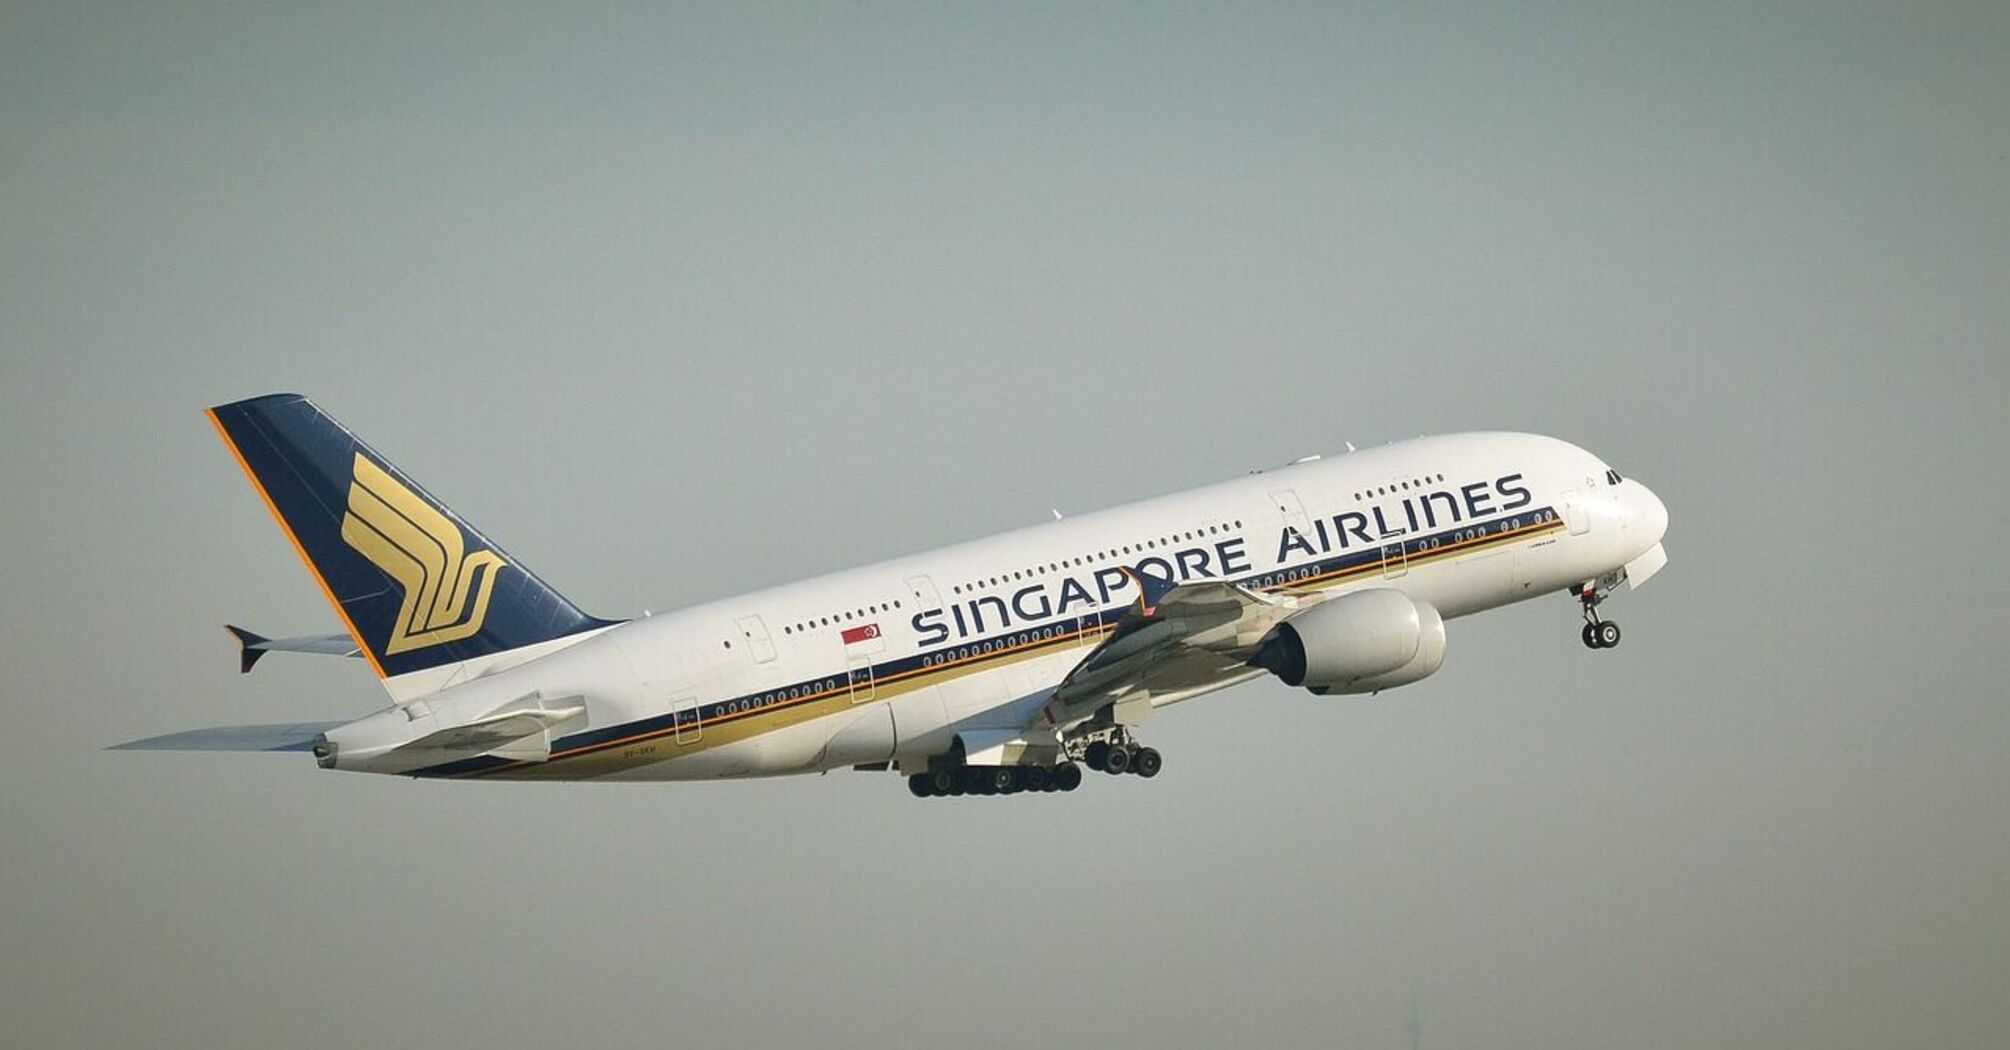 Top 3 Longest Flights in the World: Operated by Singapore Airlines, Qatar Airways, and Qantas